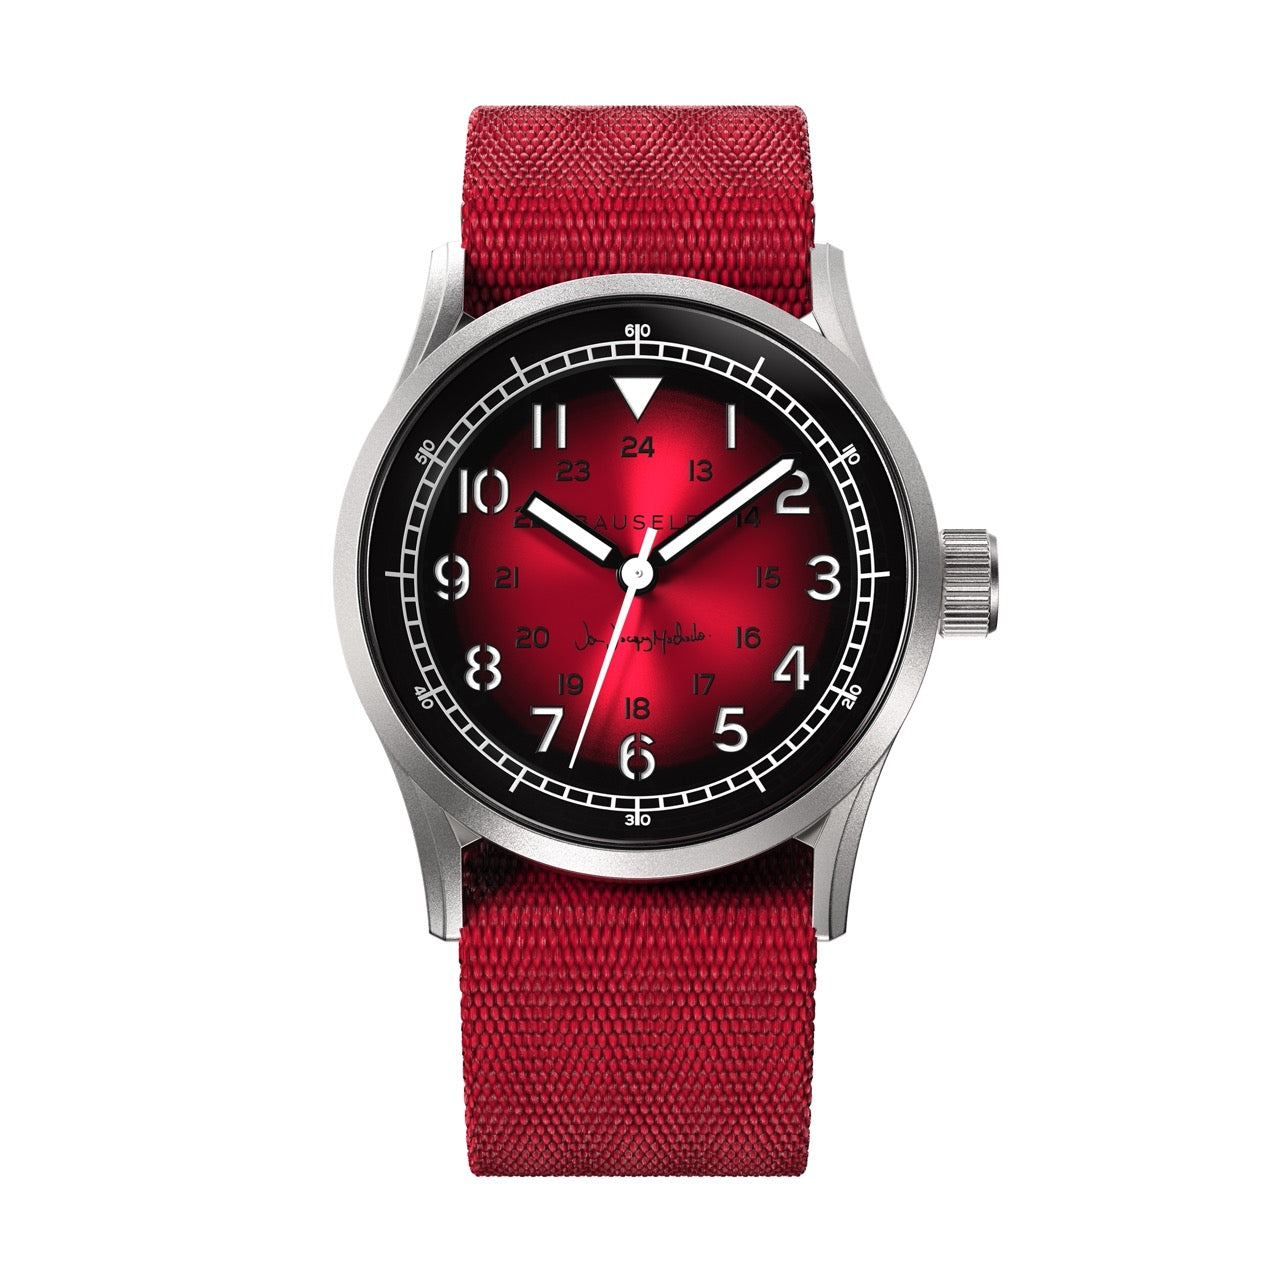 JEAN JACQUES MACHADO Limited Edition watch | Pre Order